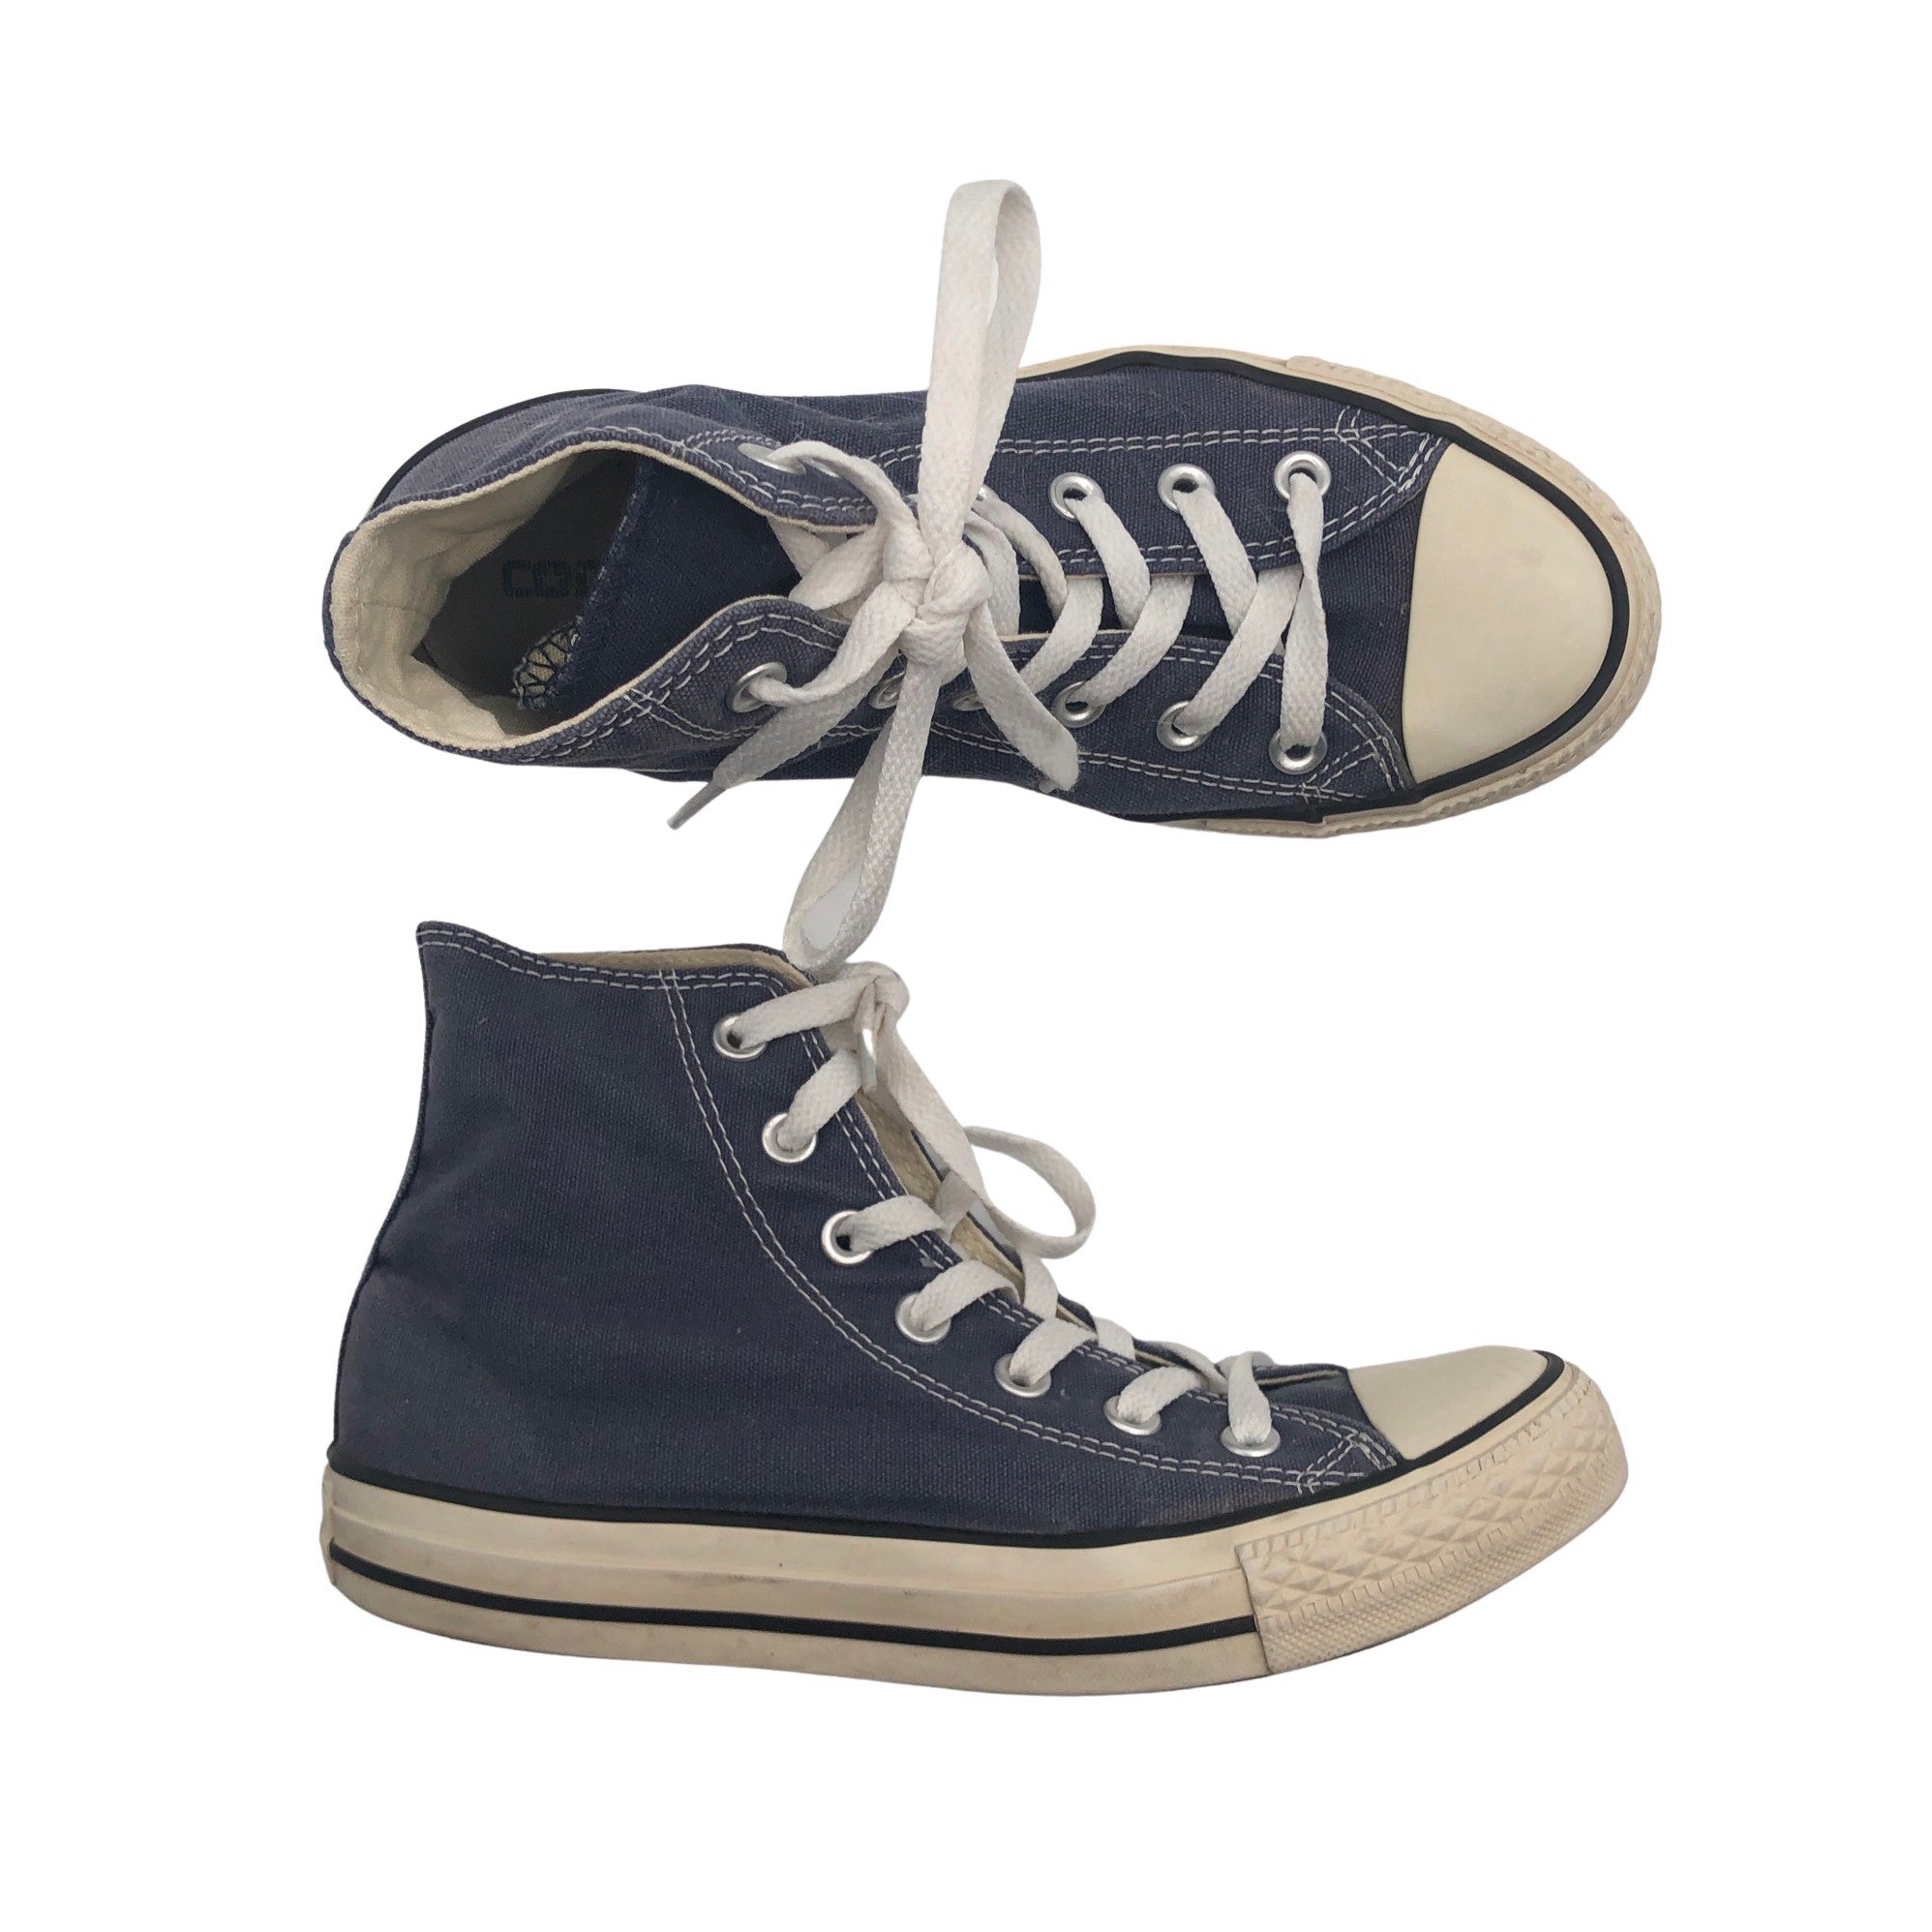 Unisex Casual sneakers, size 39 (Blue) | Emmy